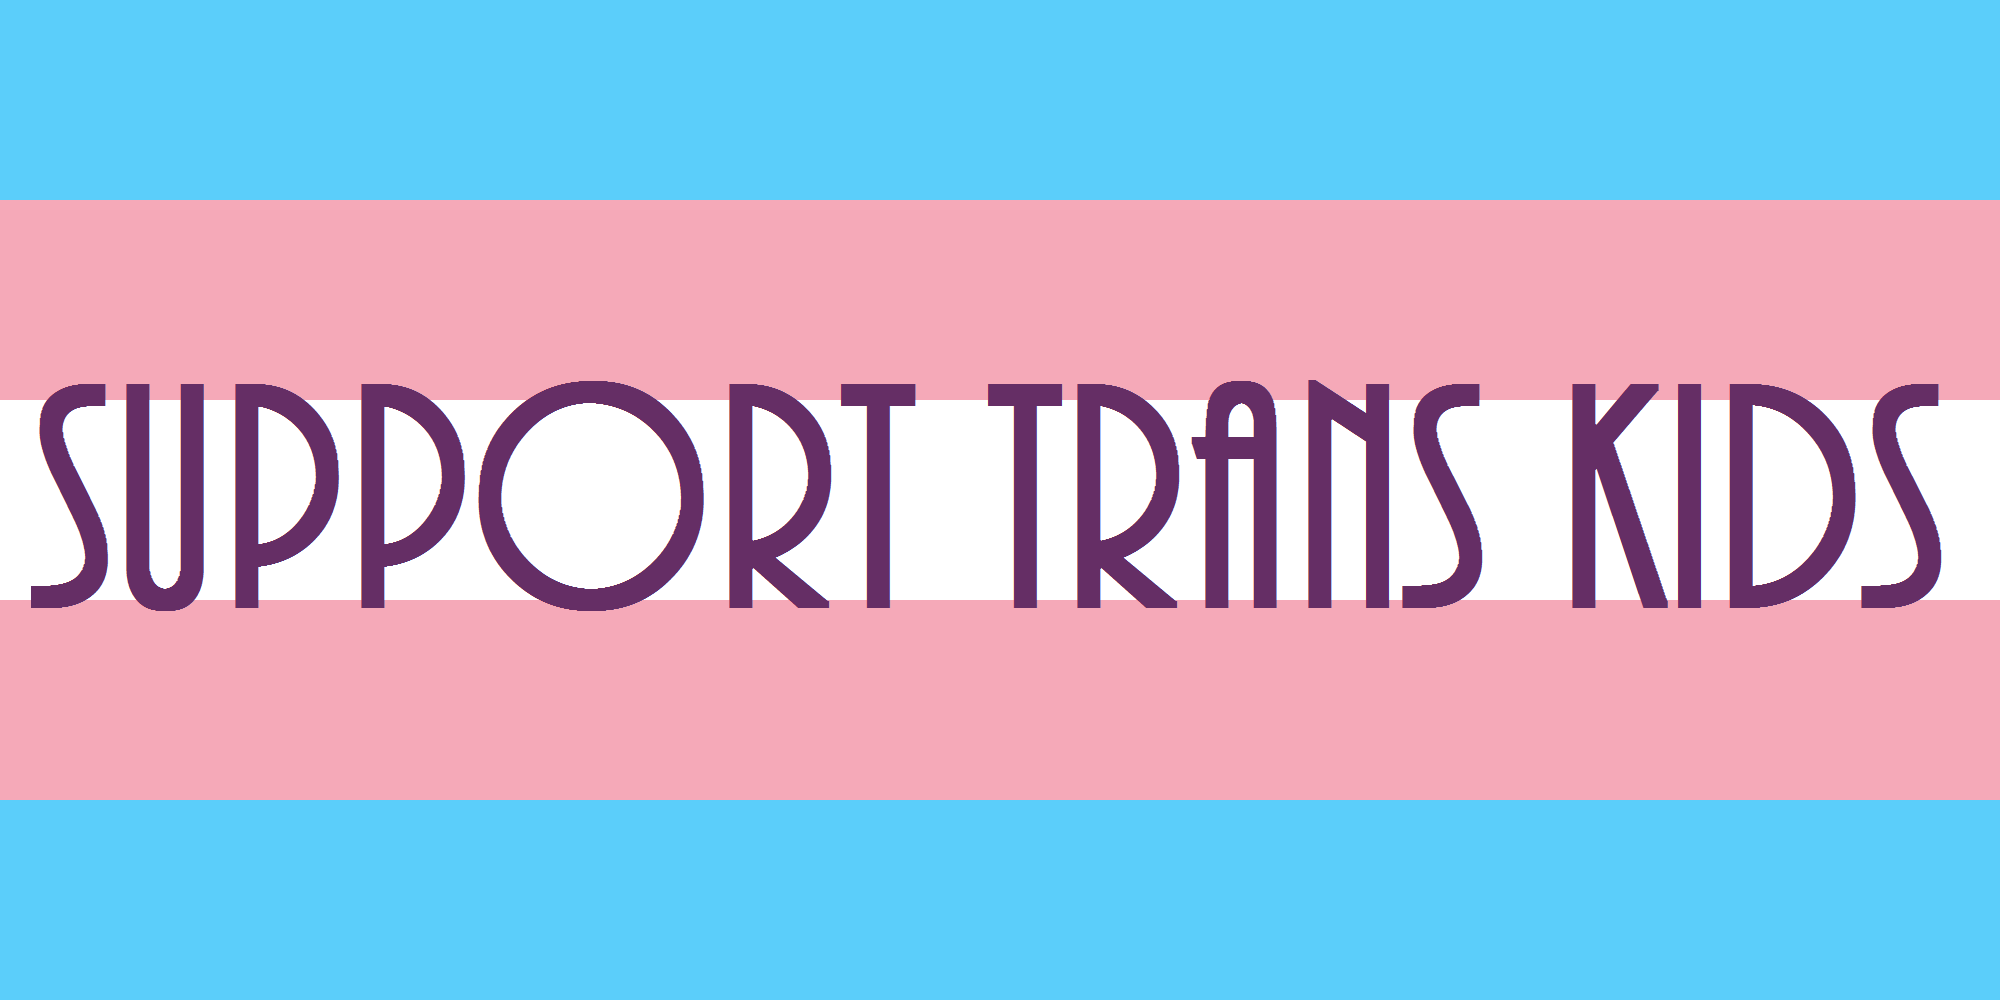 Image is a graphic of the trans flag, which has sky blue bars at the top and bottom, pink bars next, and a white bar in the middle. Caption across the middle says Support Trans Kids.